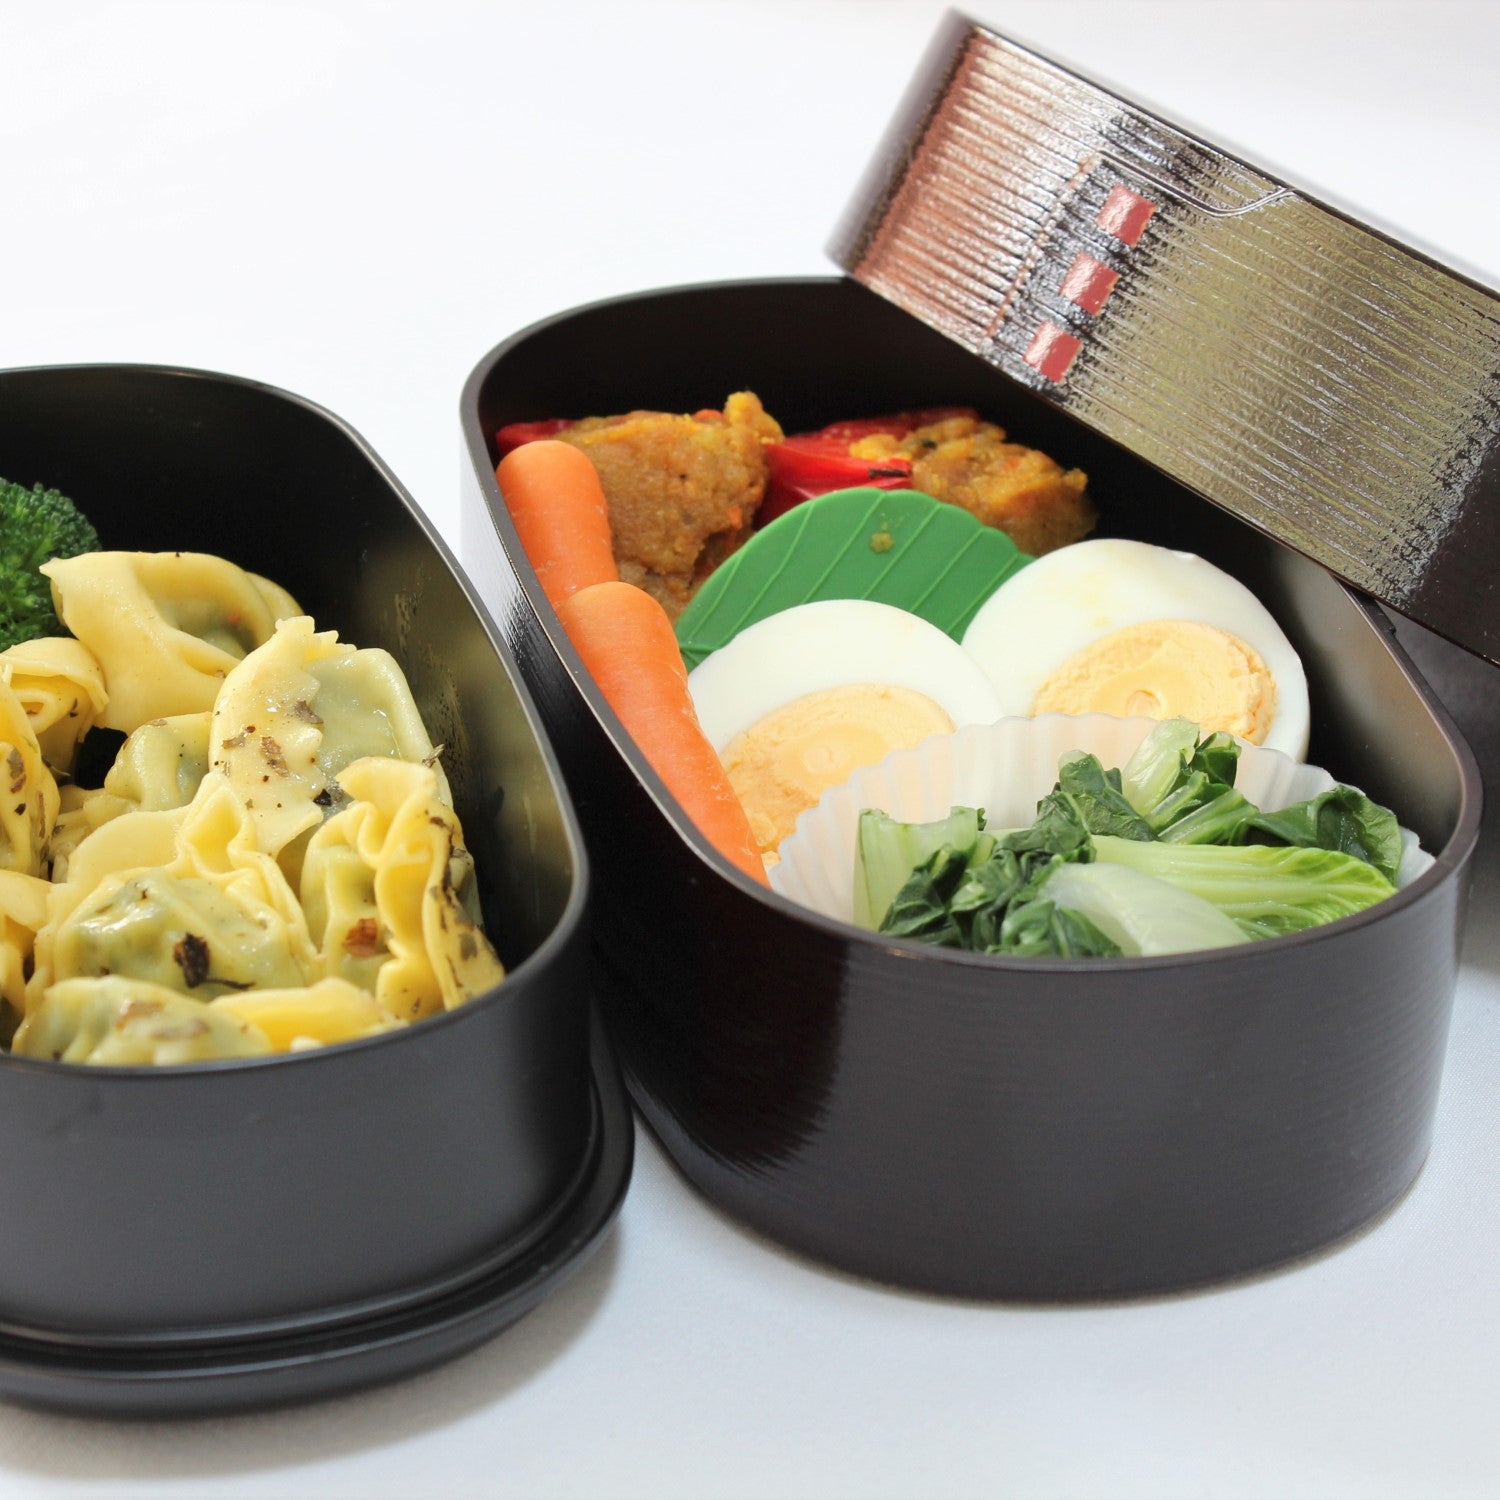 Majime Life Urushi Nuri Wappa 2 Tier Bento Box from Japan Japanese bento boxes for adults made in Japan traditional shaped bento lunch box with food dishwasher microwave safe